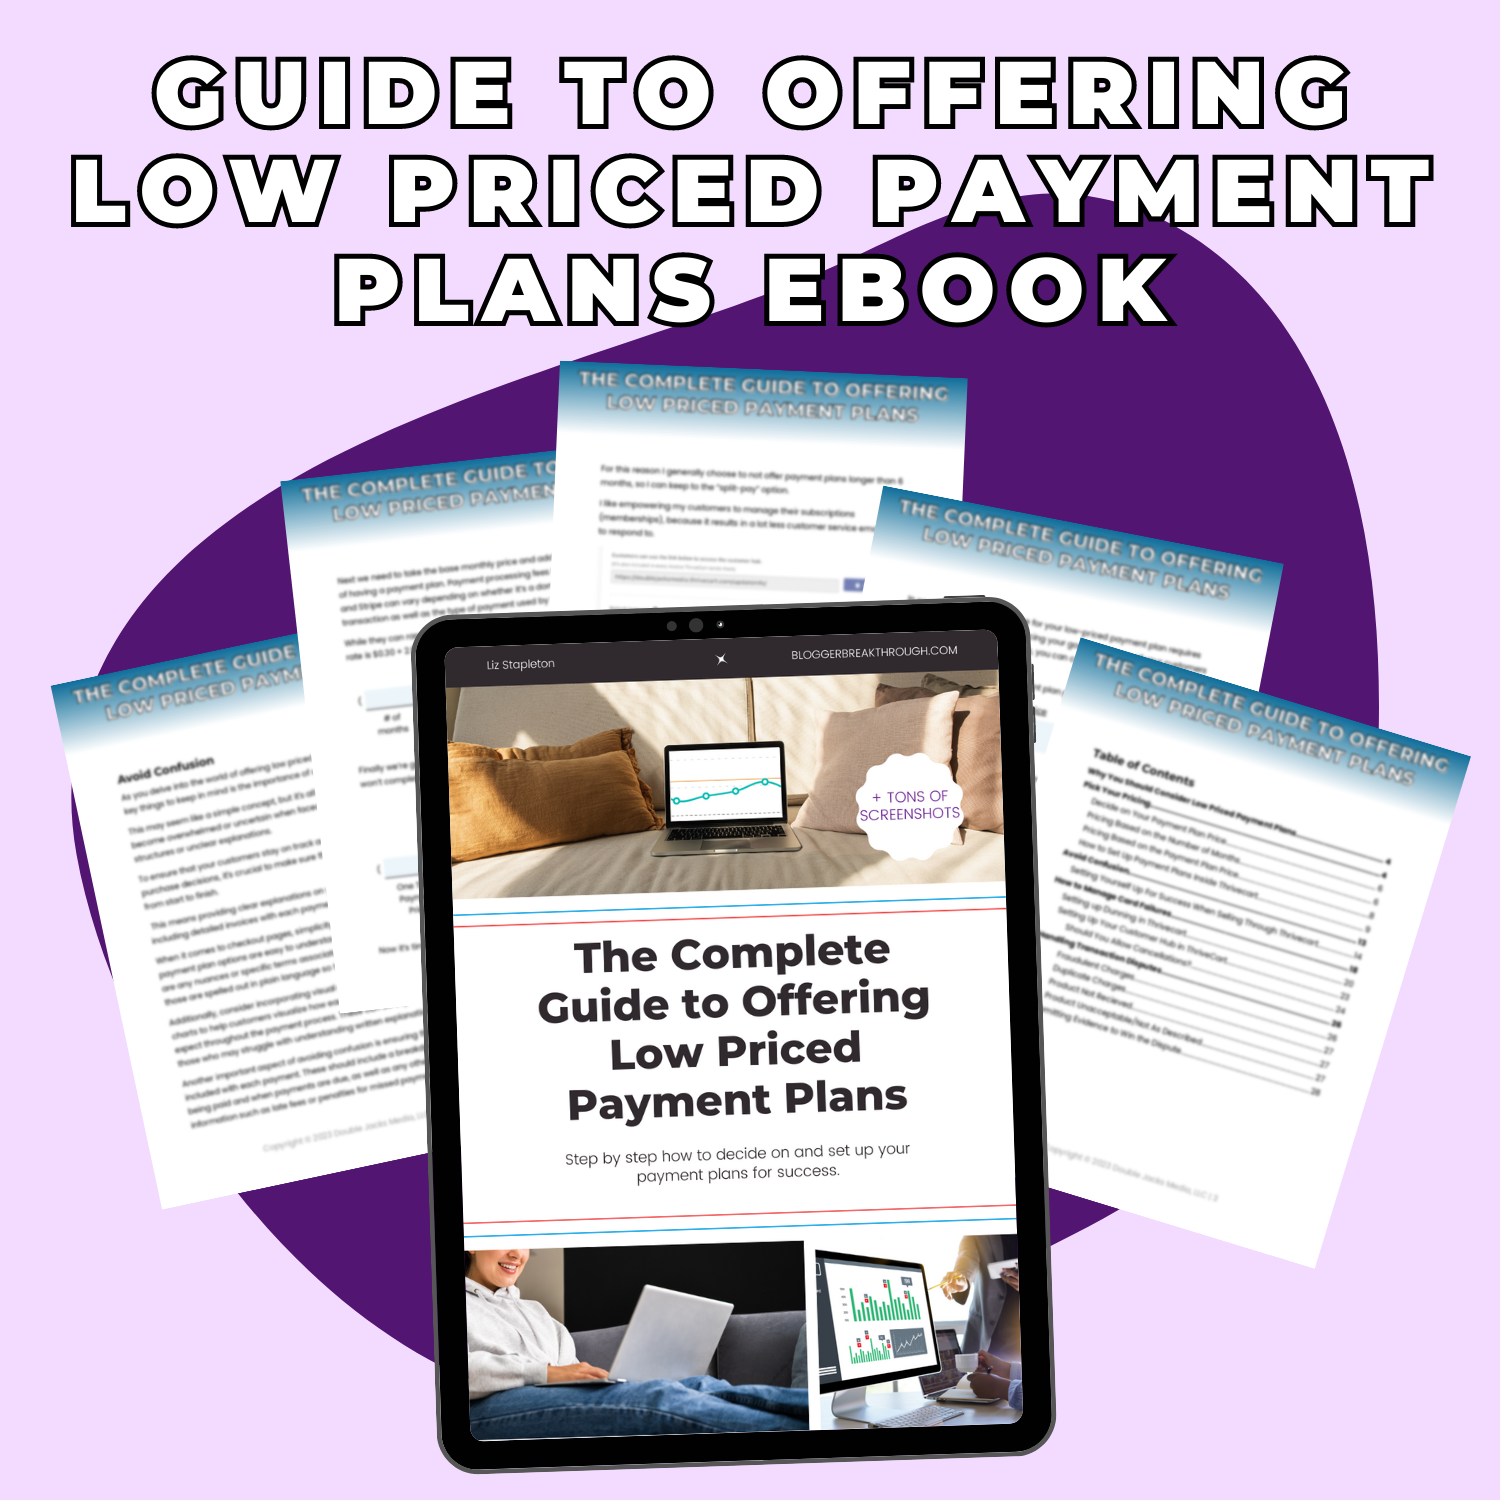 The Blogger Breakthrough Summit ebook, &quot;The Complete Guide to Offering Low Priced Payment Plans in Your Business.